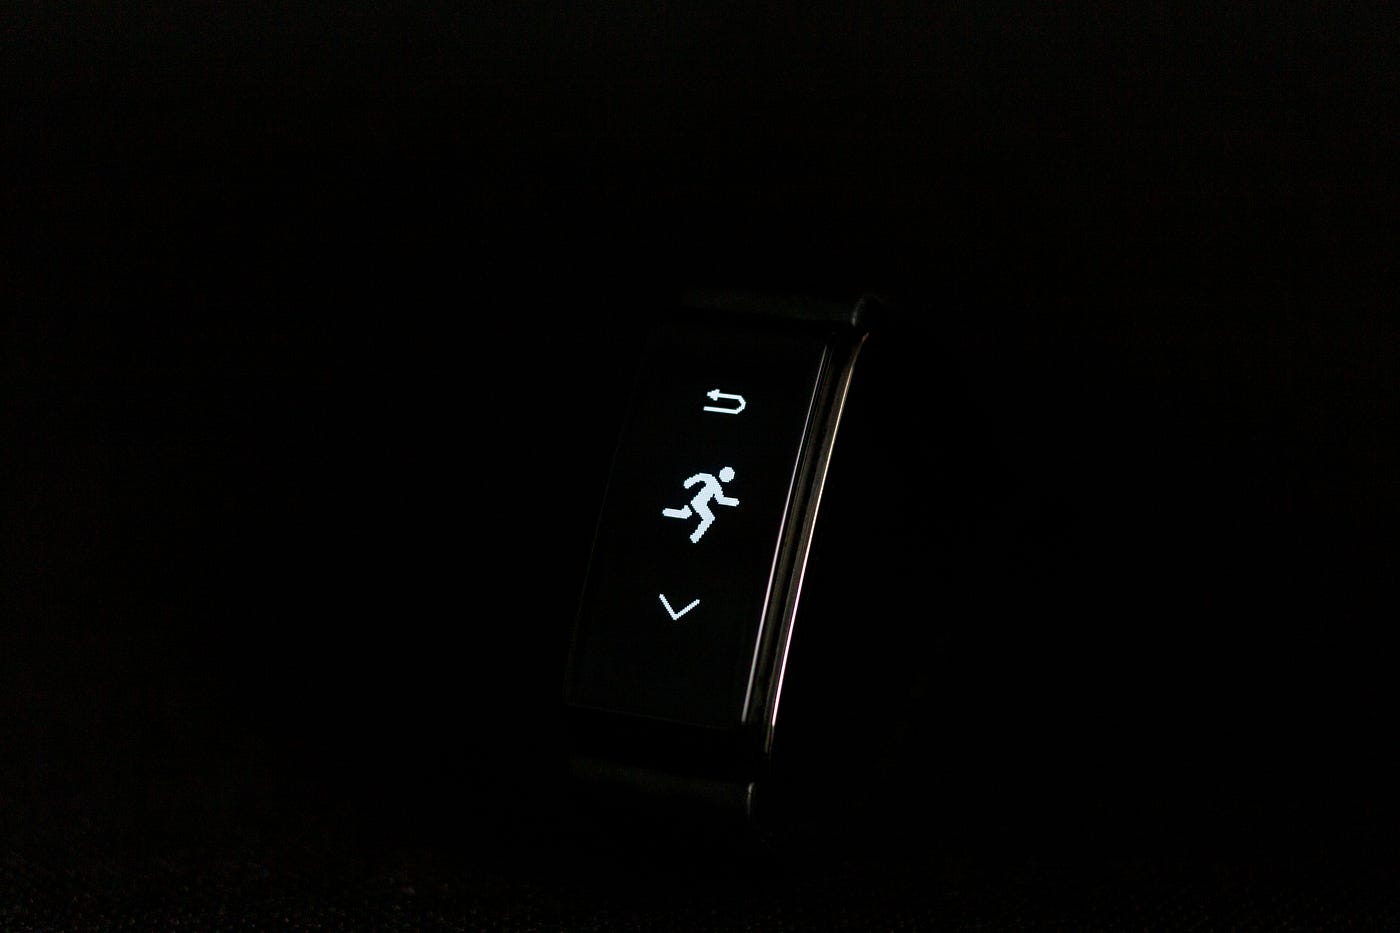 Narrow black pedometer shows a stick figure running. The image is in black and white.